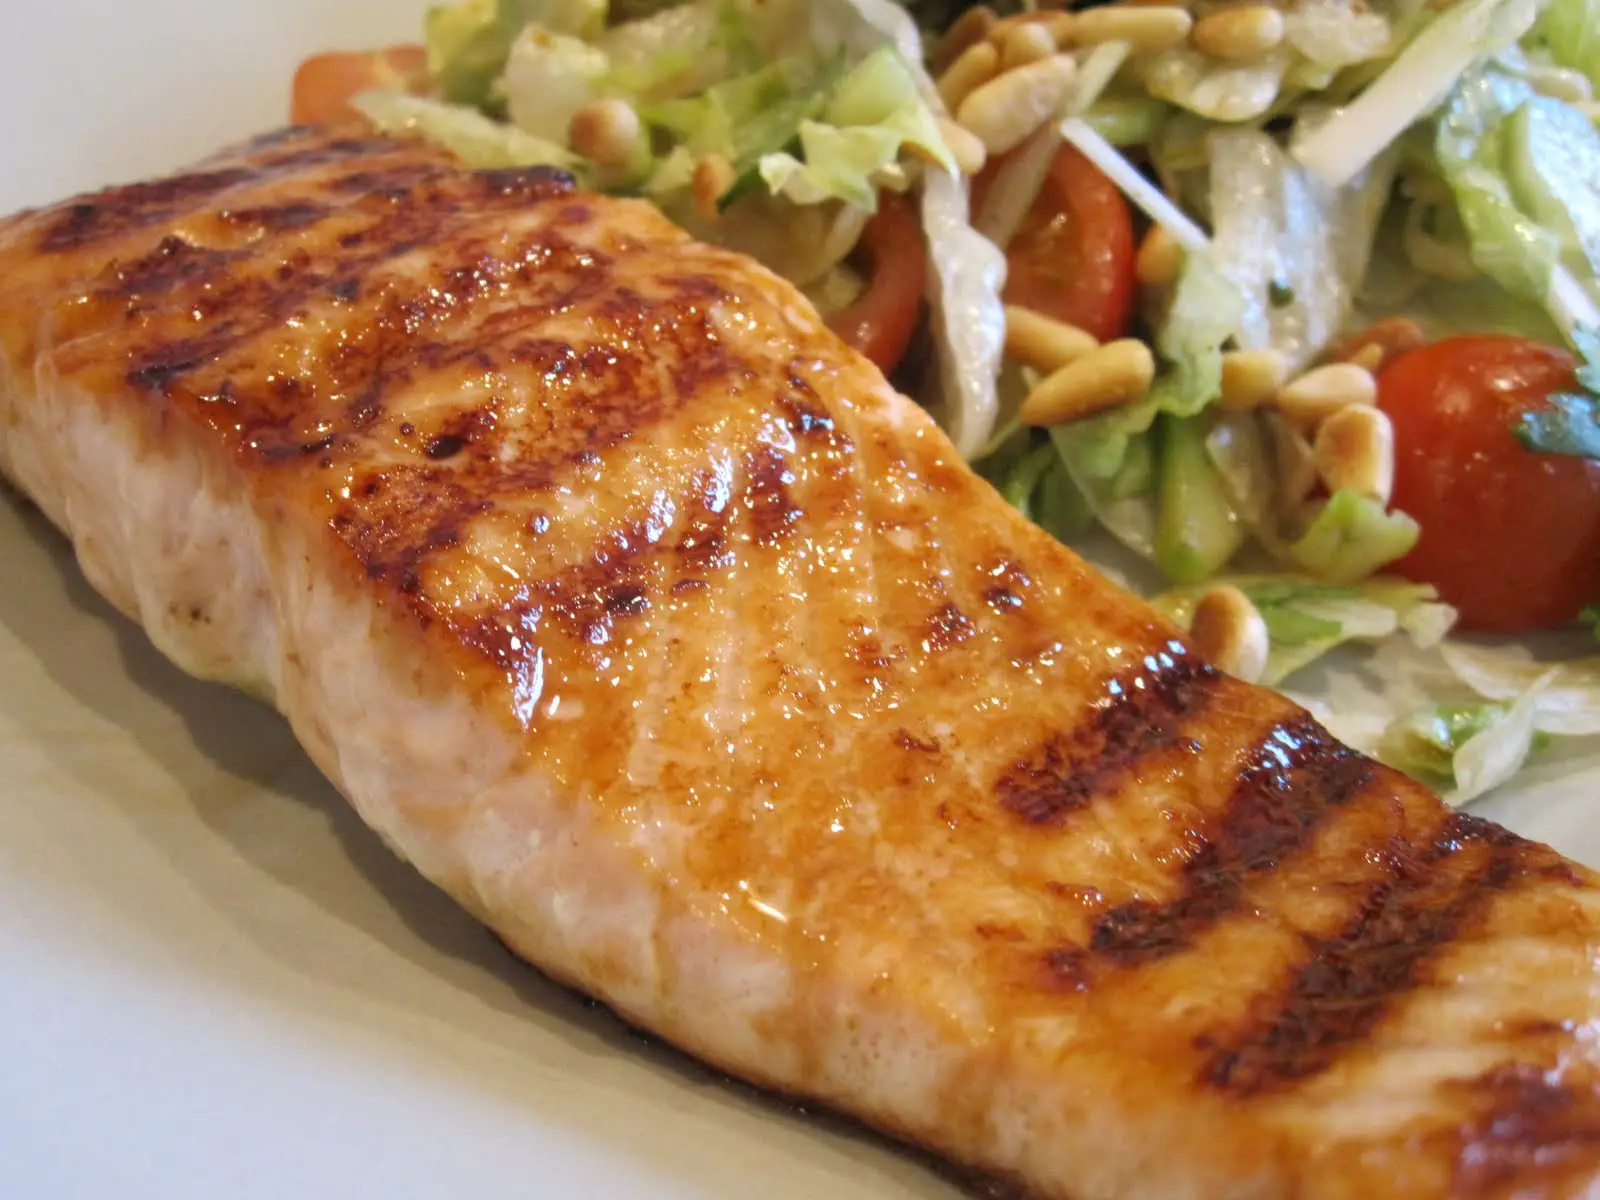 Food Devil: How to cook a Salmon Steak to perfection